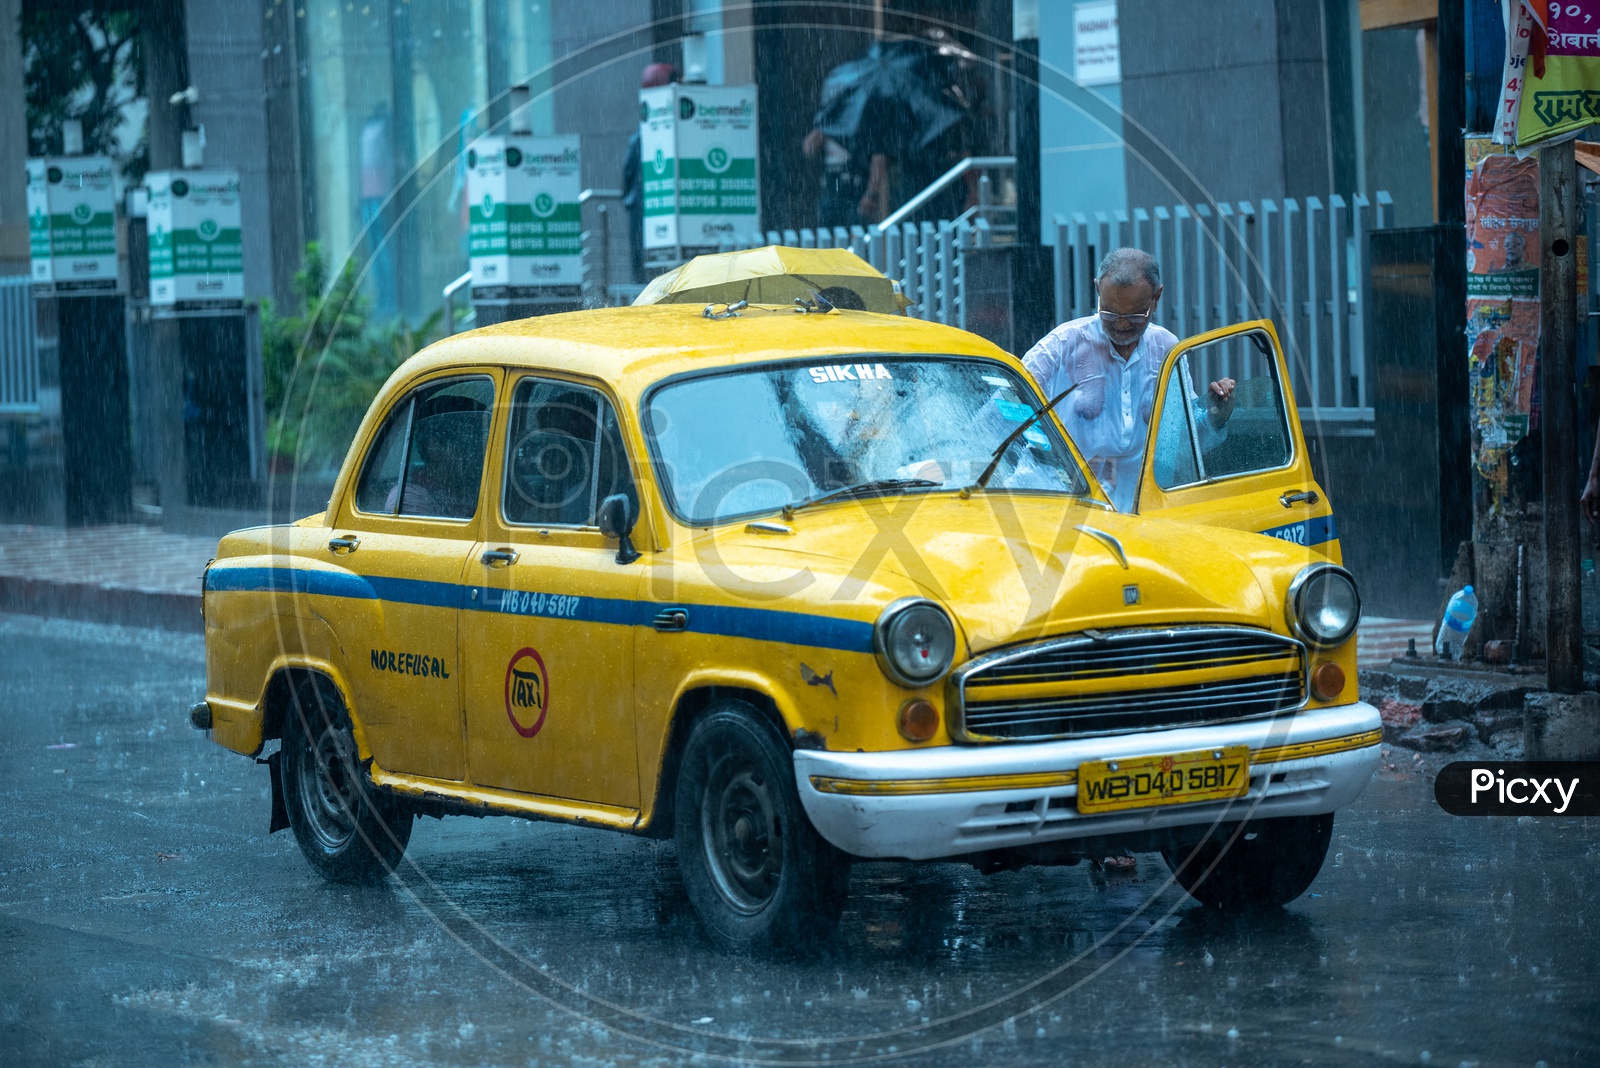 A Commuter Taking  a  Yellow Cabs Or taxis   in Heavy Rain Due To Cyclone Fani